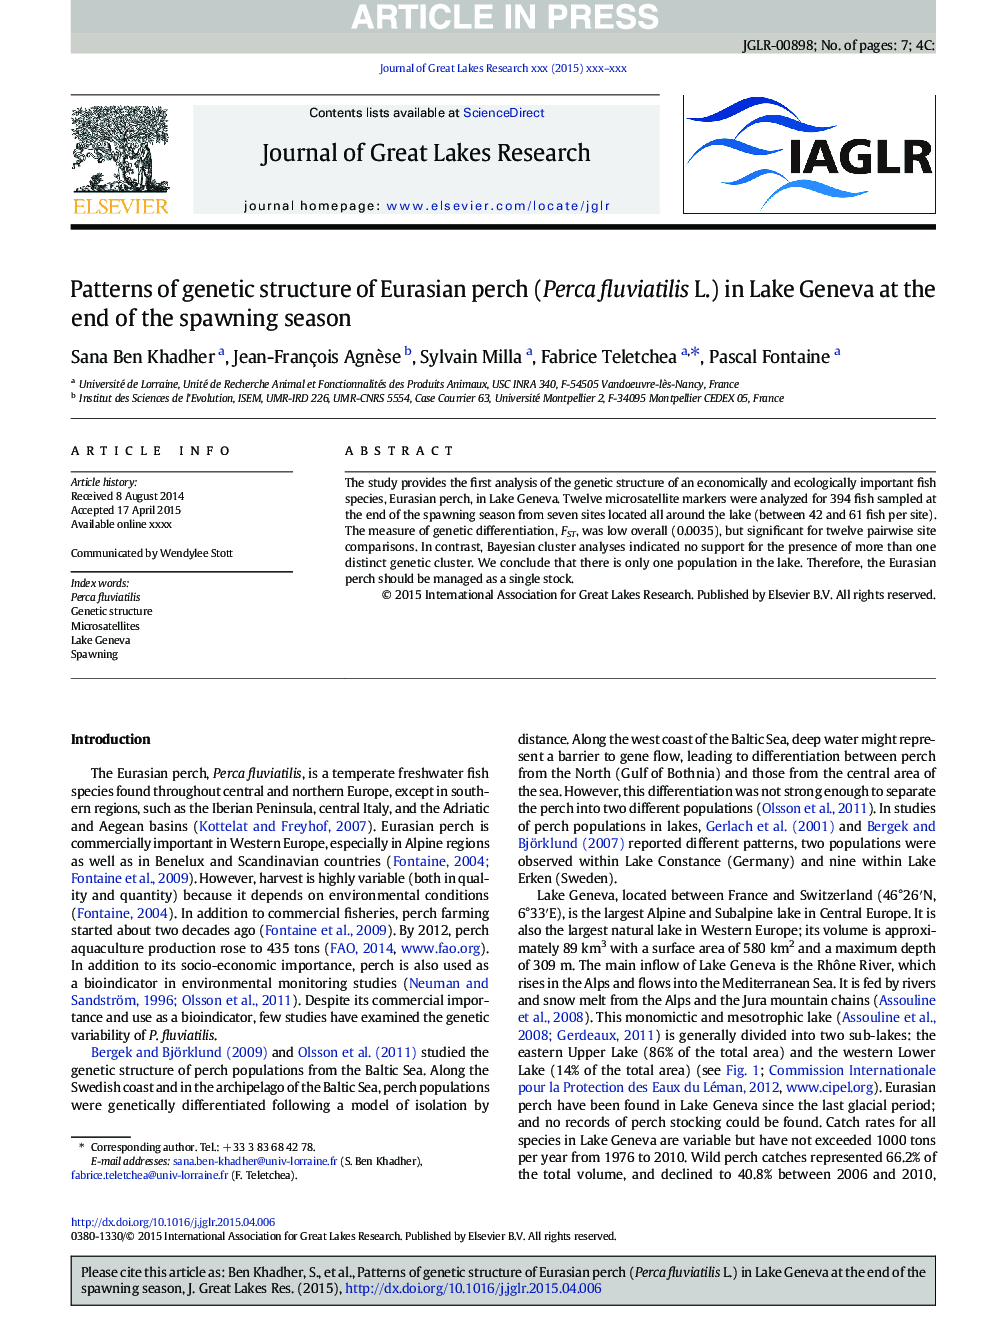 Patterns of genetic structure of Eurasian perch (Perca fluviatilis L.) in Lake Geneva at the end of the spawning season